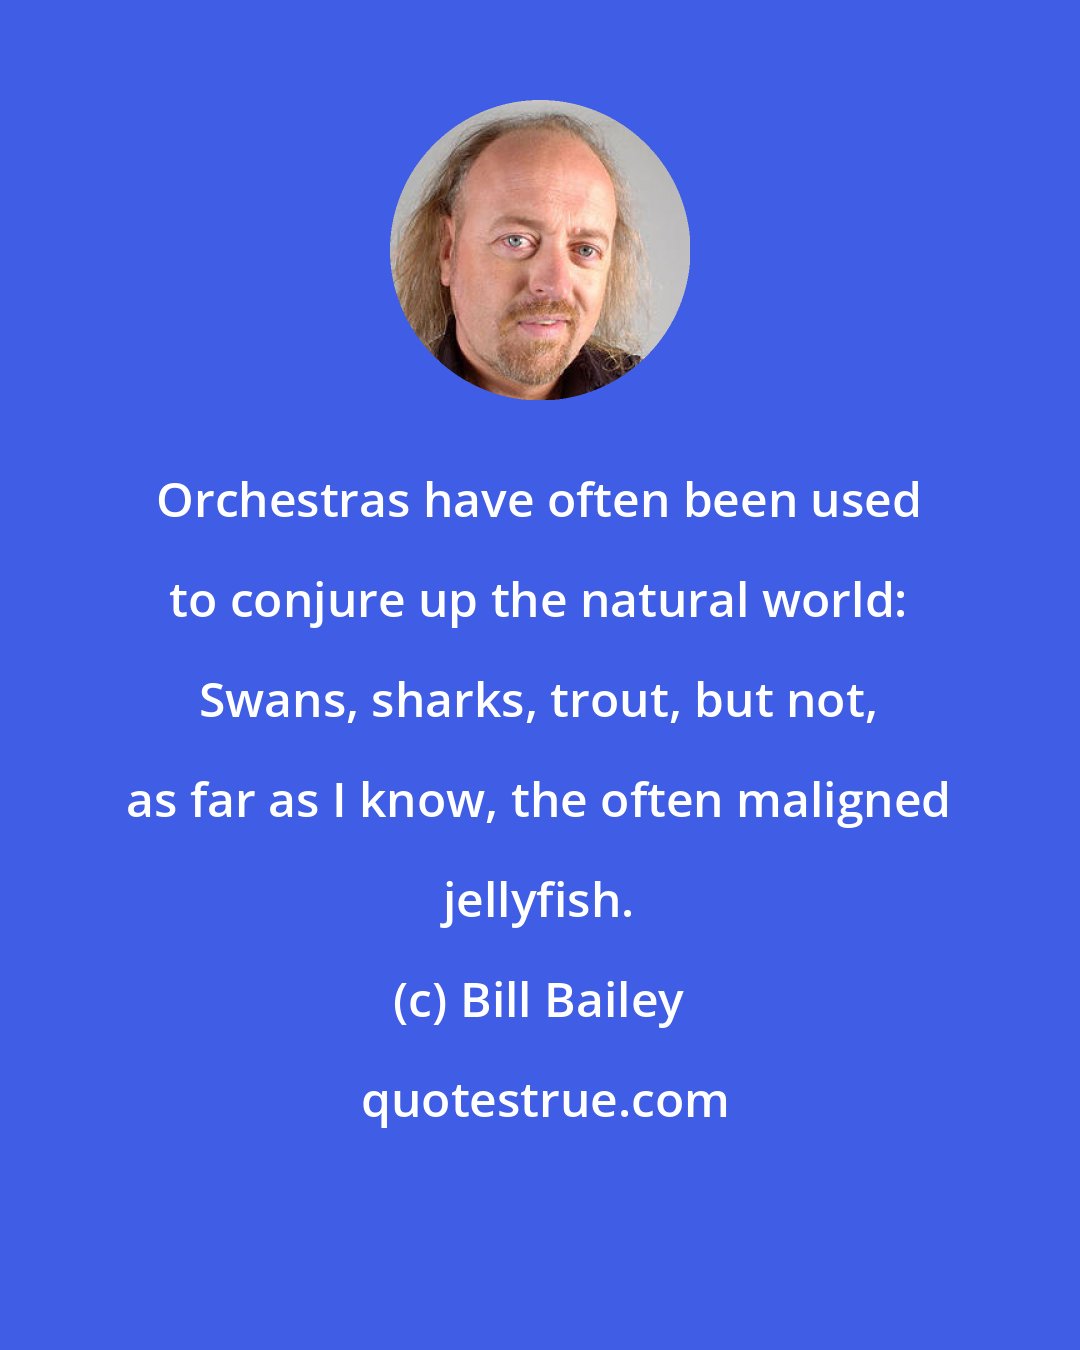 Bill Bailey: Orchestras have often been used to conjure up the natural world: Swans, sharks, trout, but not, as far as I know, the often maligned jellyfish.